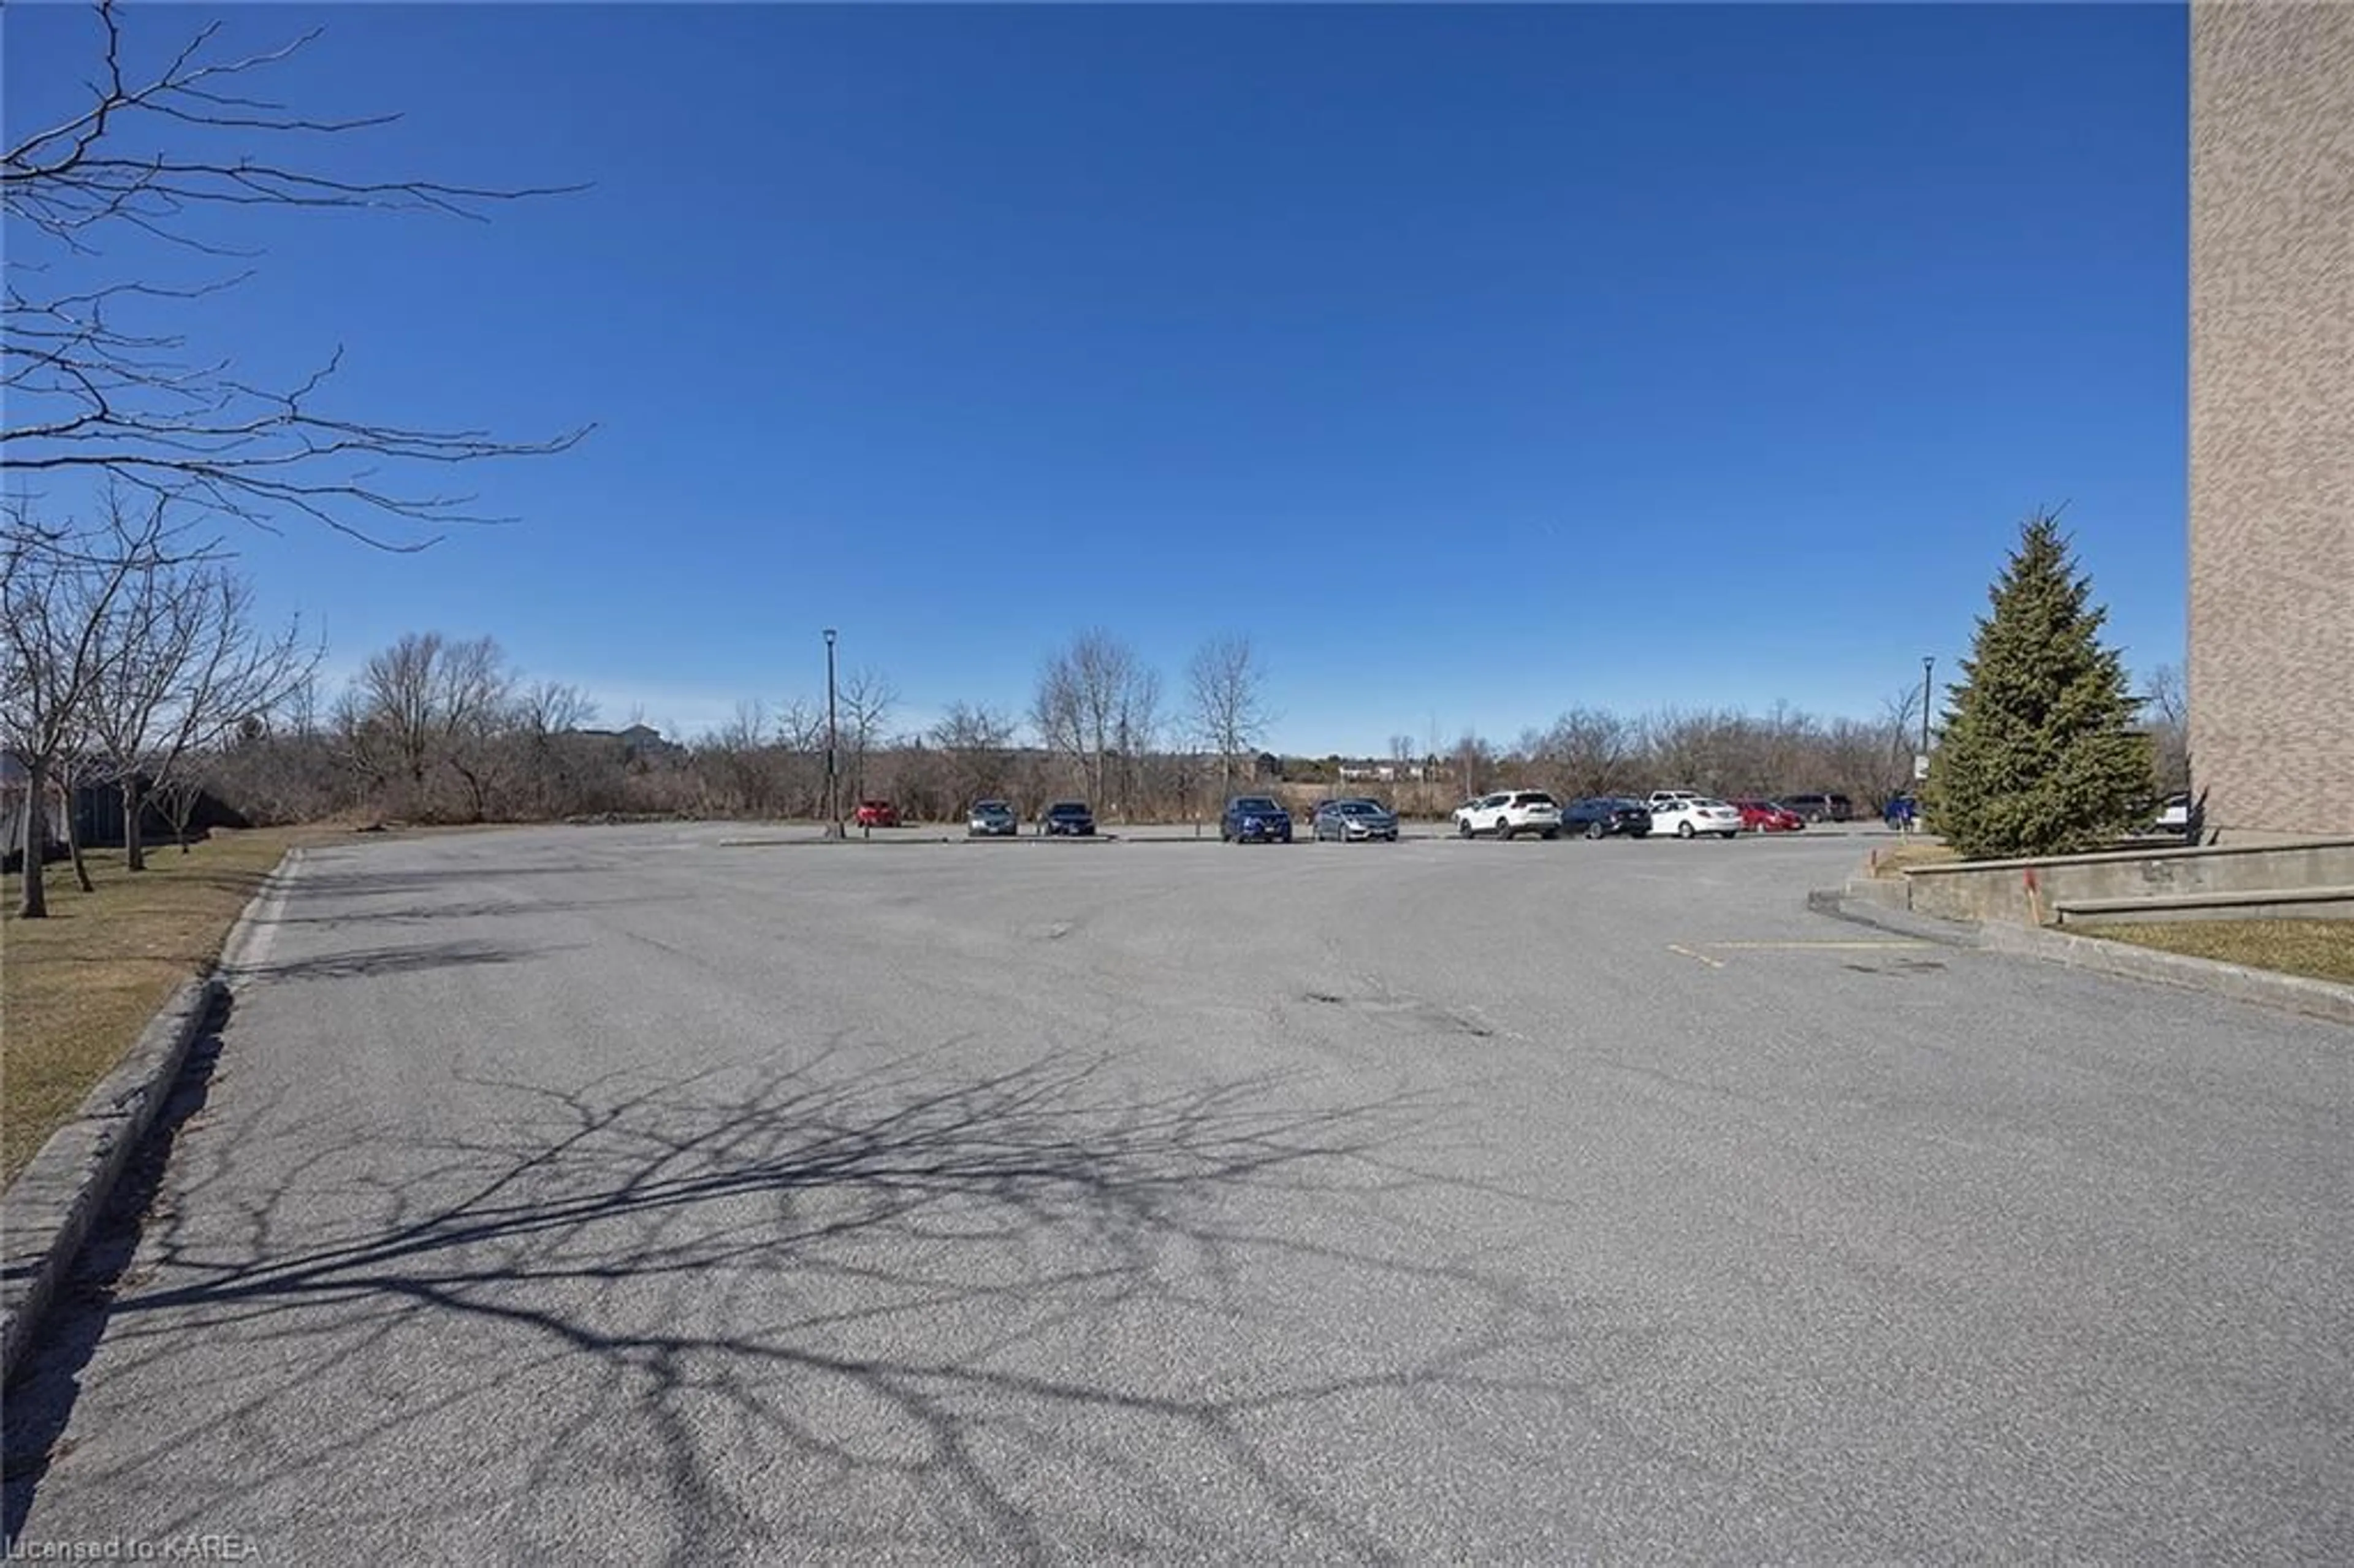 Street view for 334 Queen Mary Rd #305, Kingston Ontario K7M 7E7